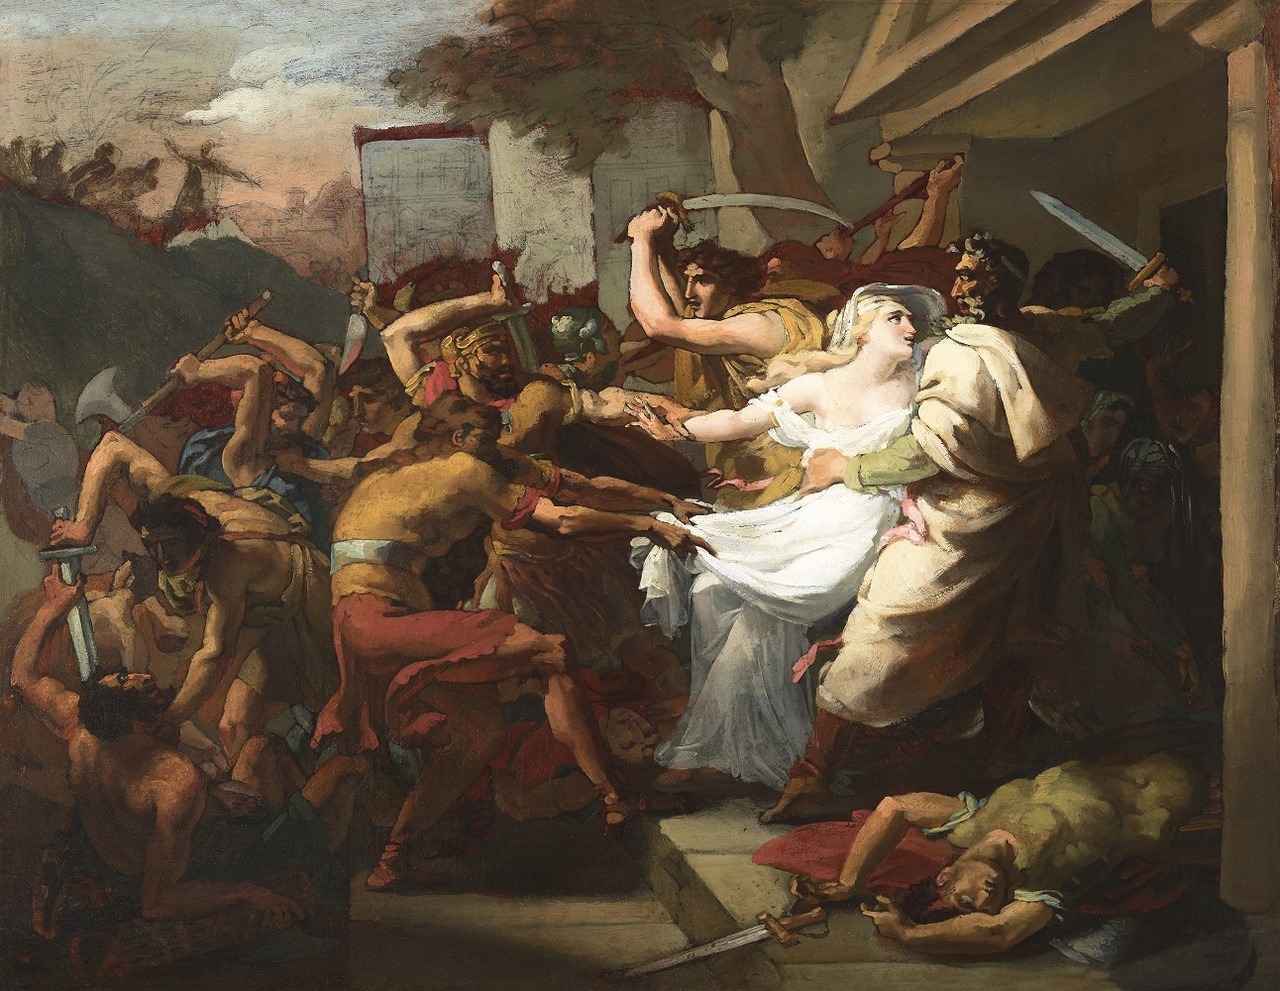 hildegardavon:
“ François Dubois, 1790-1871
The reunion of Menelaus and Helen in Troy, ca.1820, oil, pen and ink on oiled paper laid down on canvas, 44x57 cm
Private Collection
”